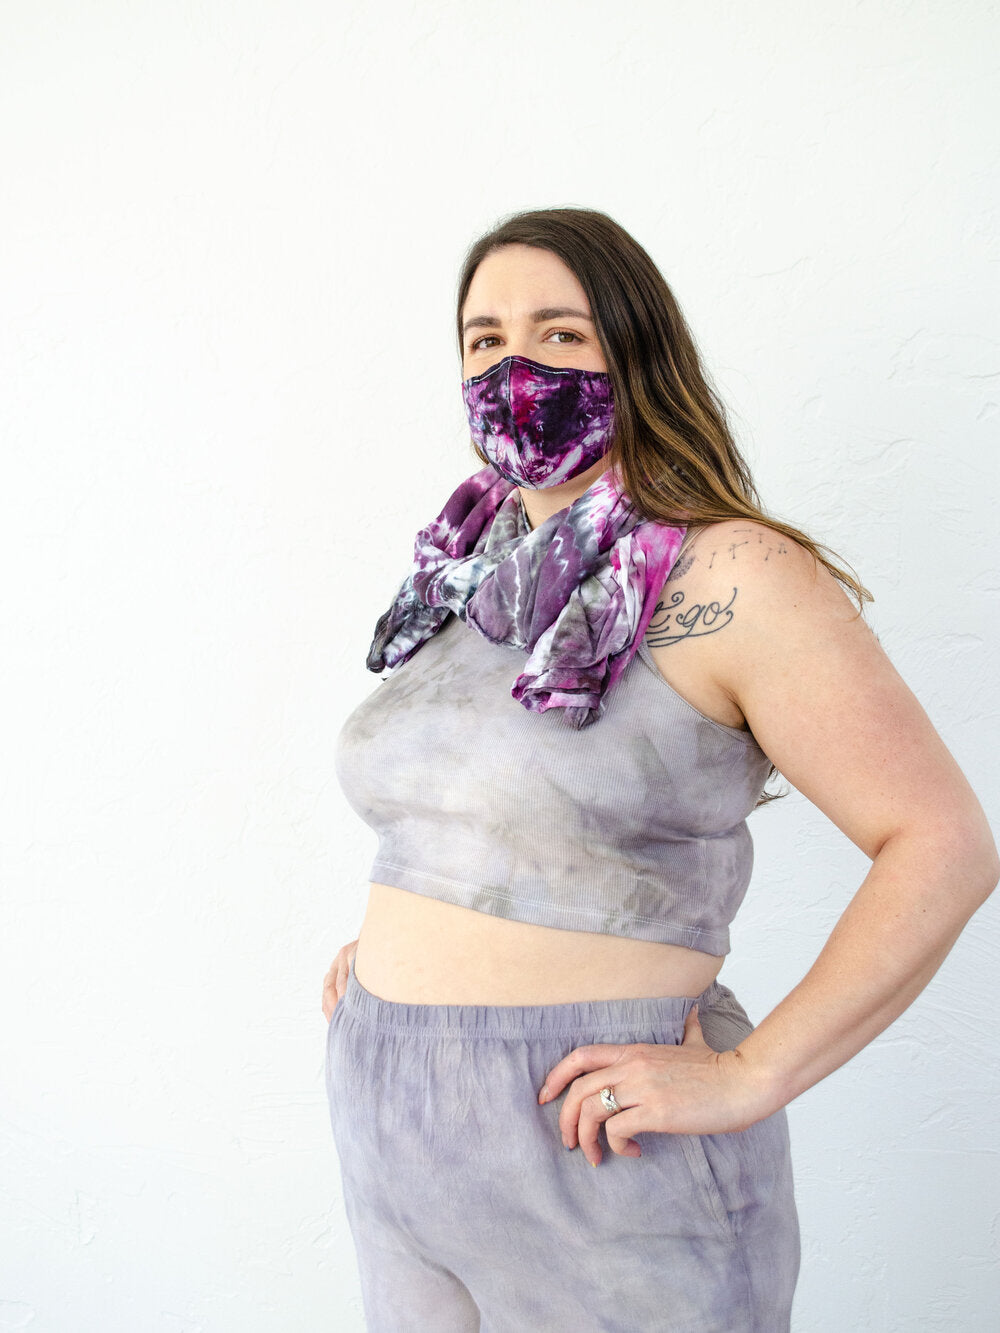 Tie Dyed Scarf and Wrap - The Butterfly Wrap Number 3 - Tie Dye Sustainable Rayon Wrap by 1 Life